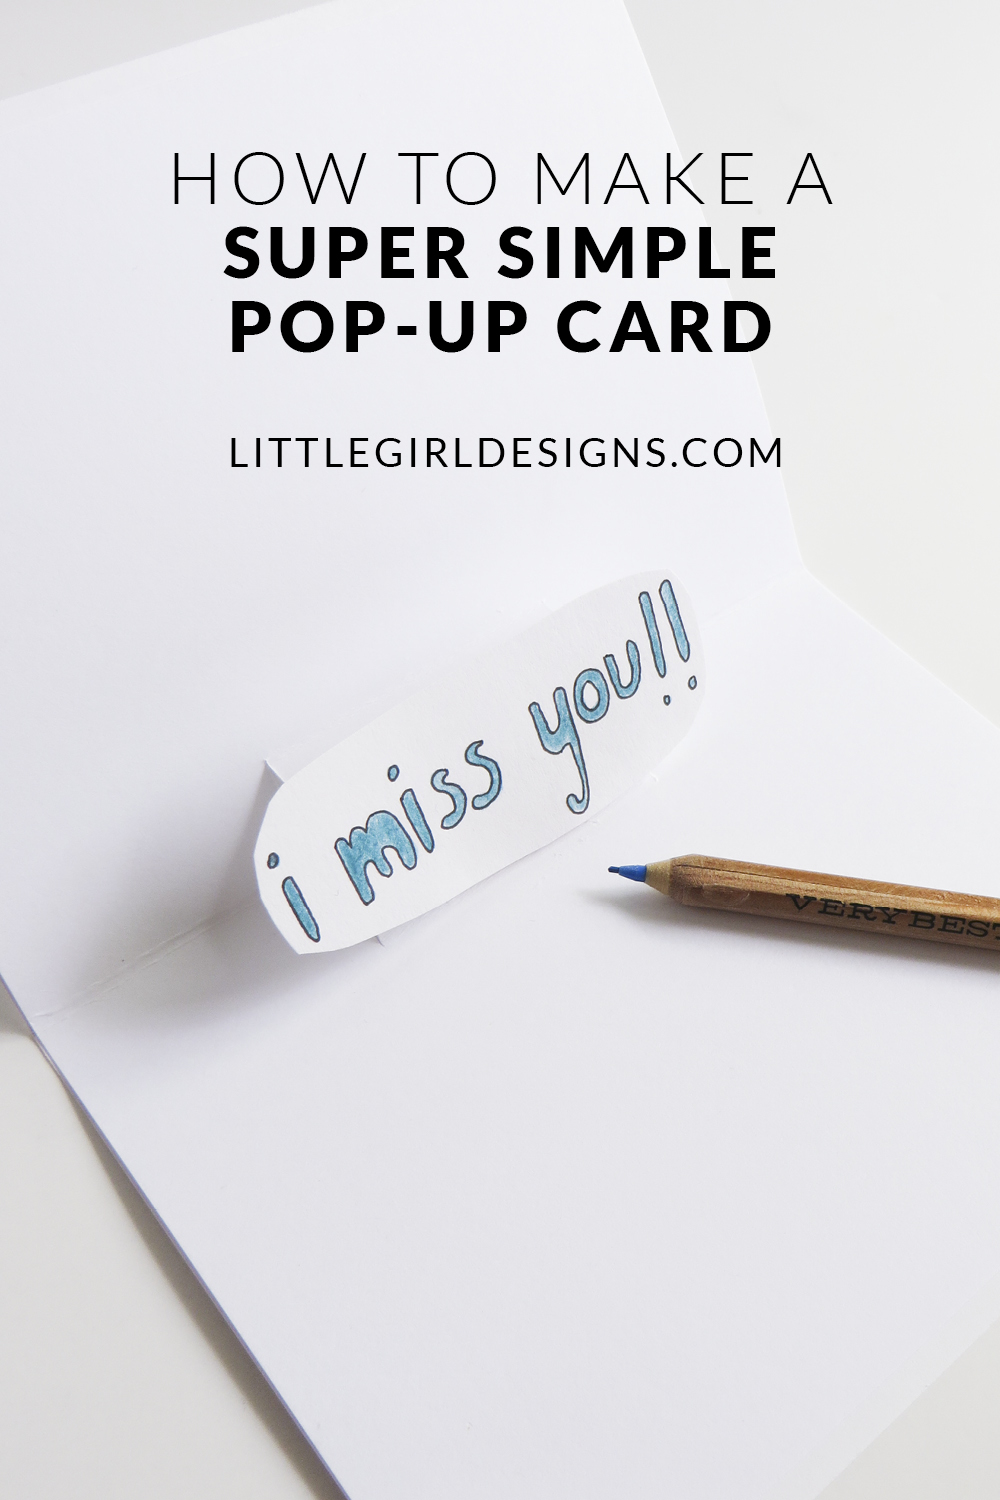 How to Make a Super Simple Pop-up Card